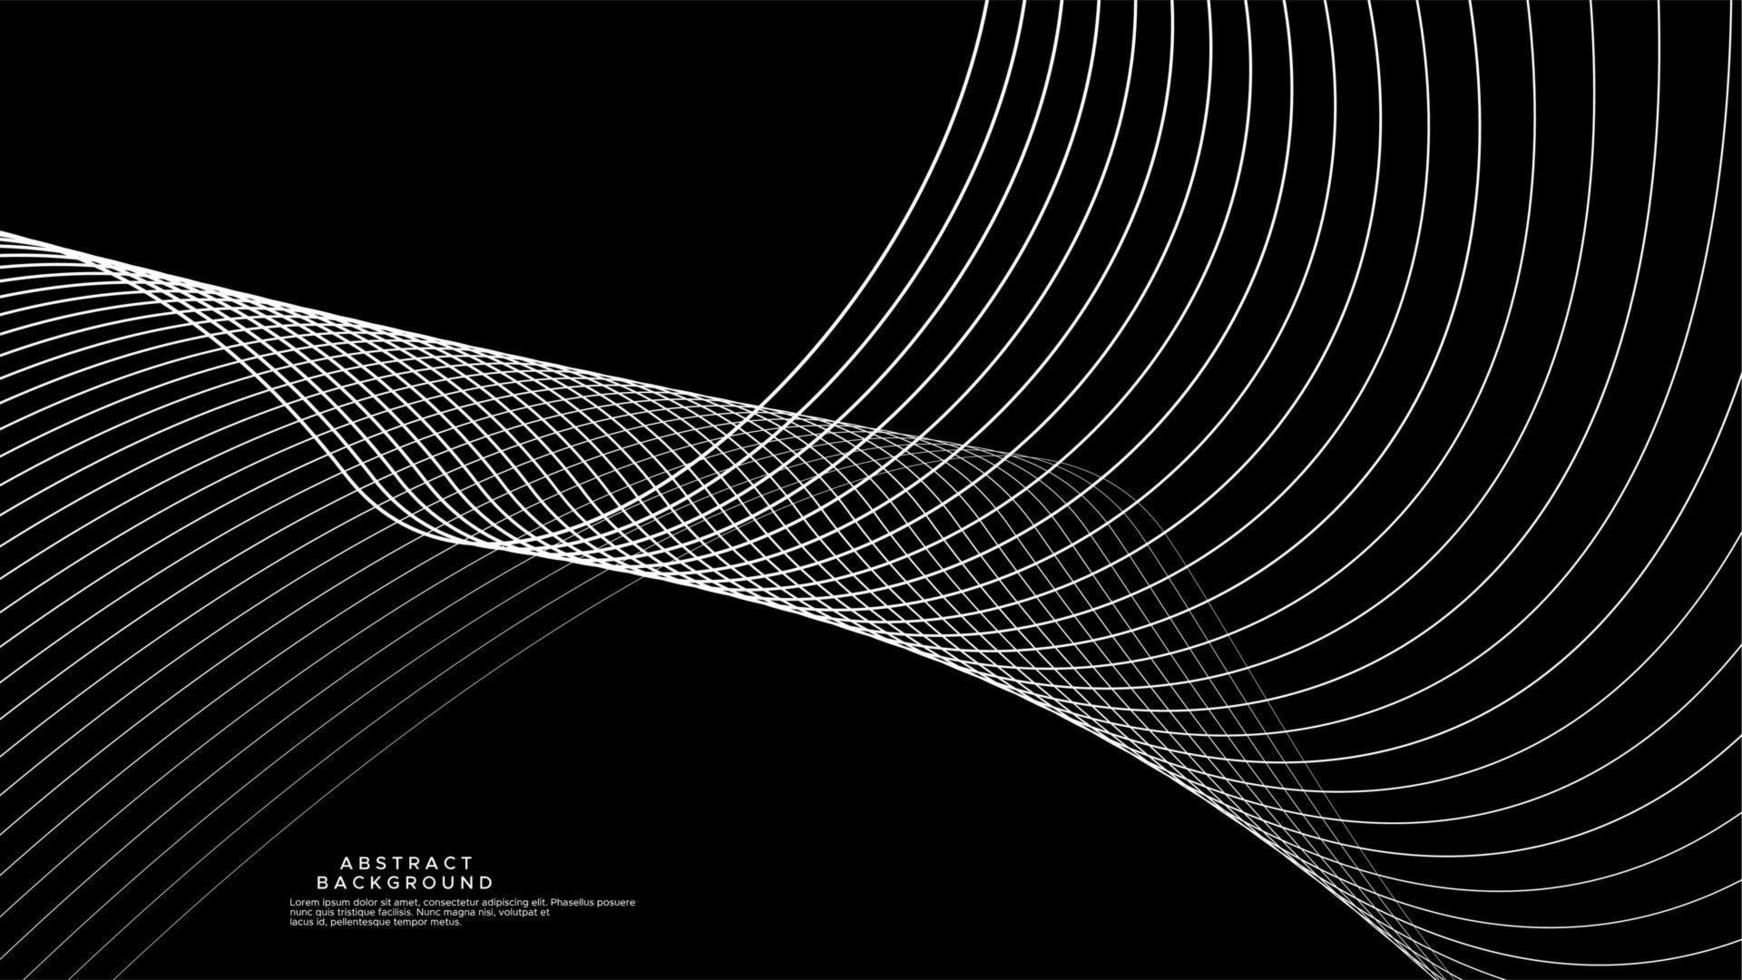 Black and white wave line abstract background design. Modern blend line vector graphic.